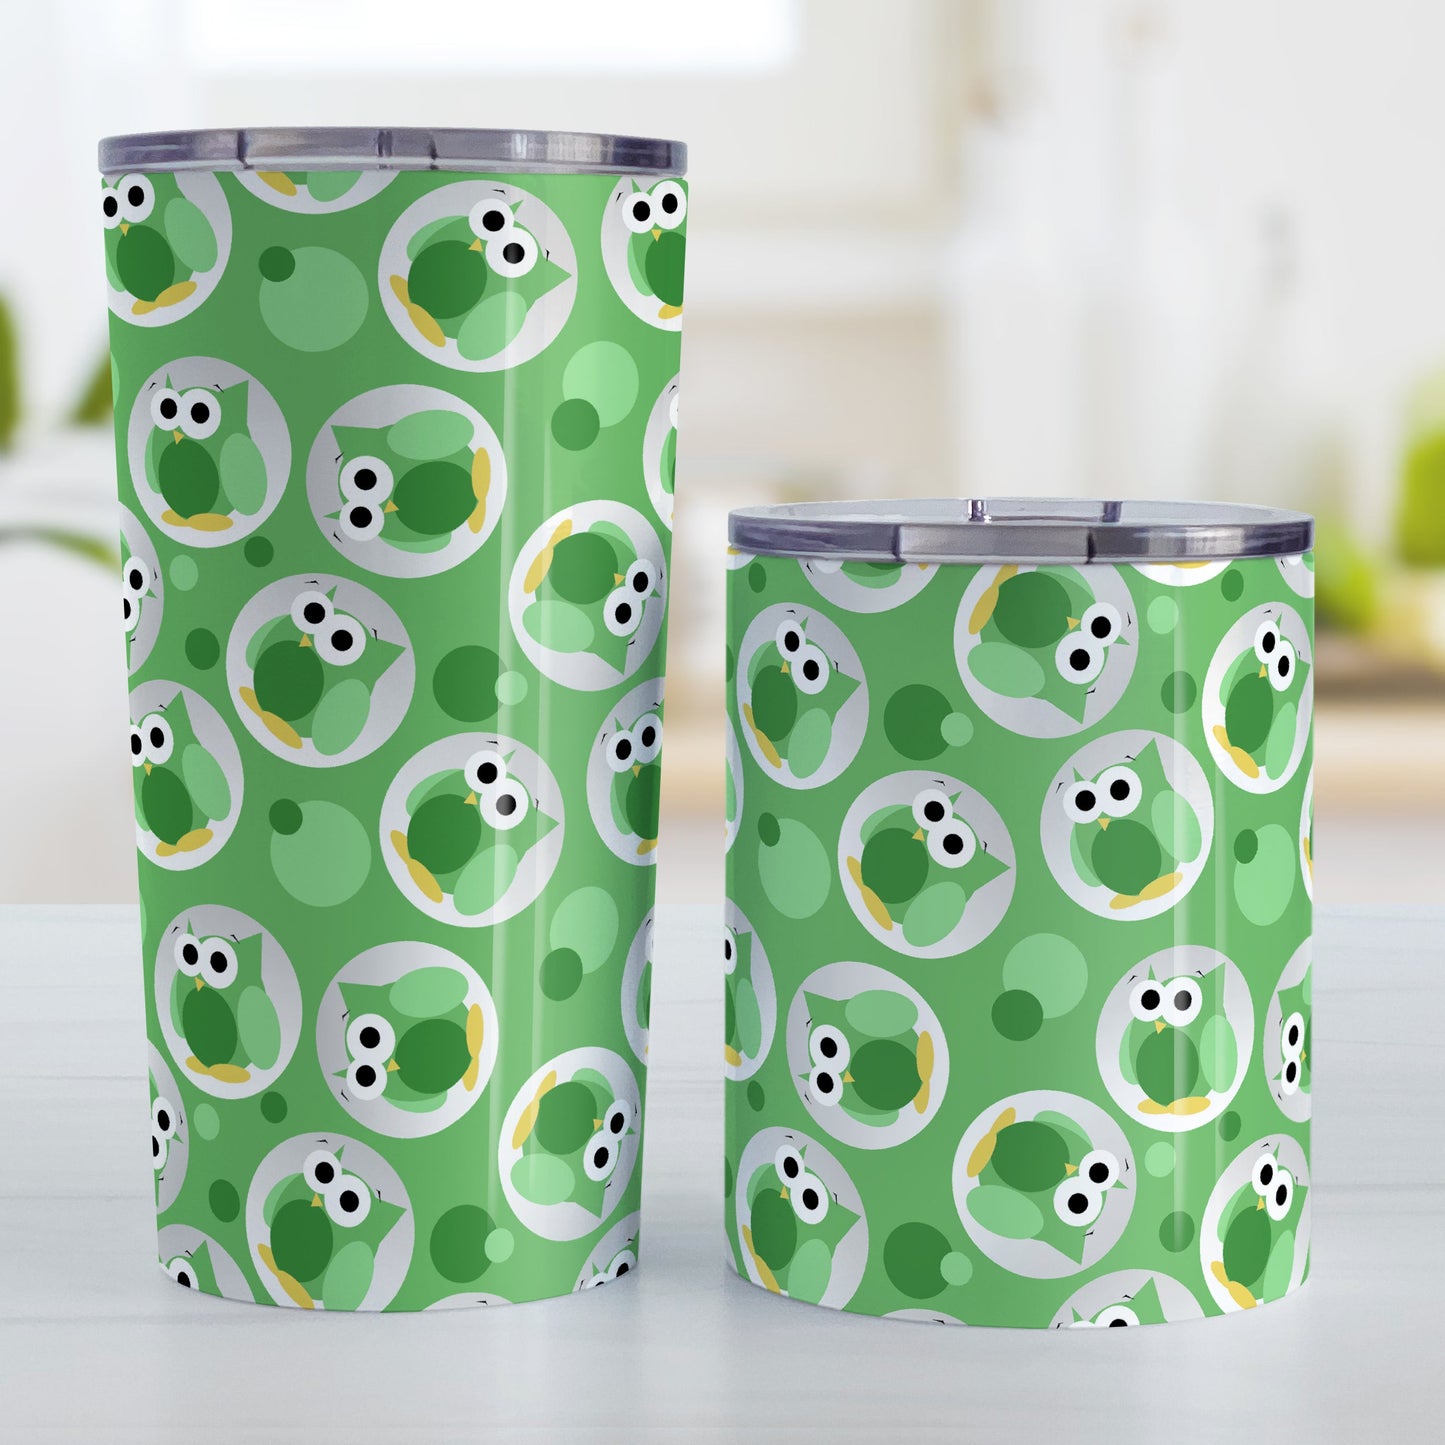 Funny Cute Green Owl Pattern Tumbler Cup (20oz and 10oz, stainless steel insulated) at Amy's Coffee Mugs